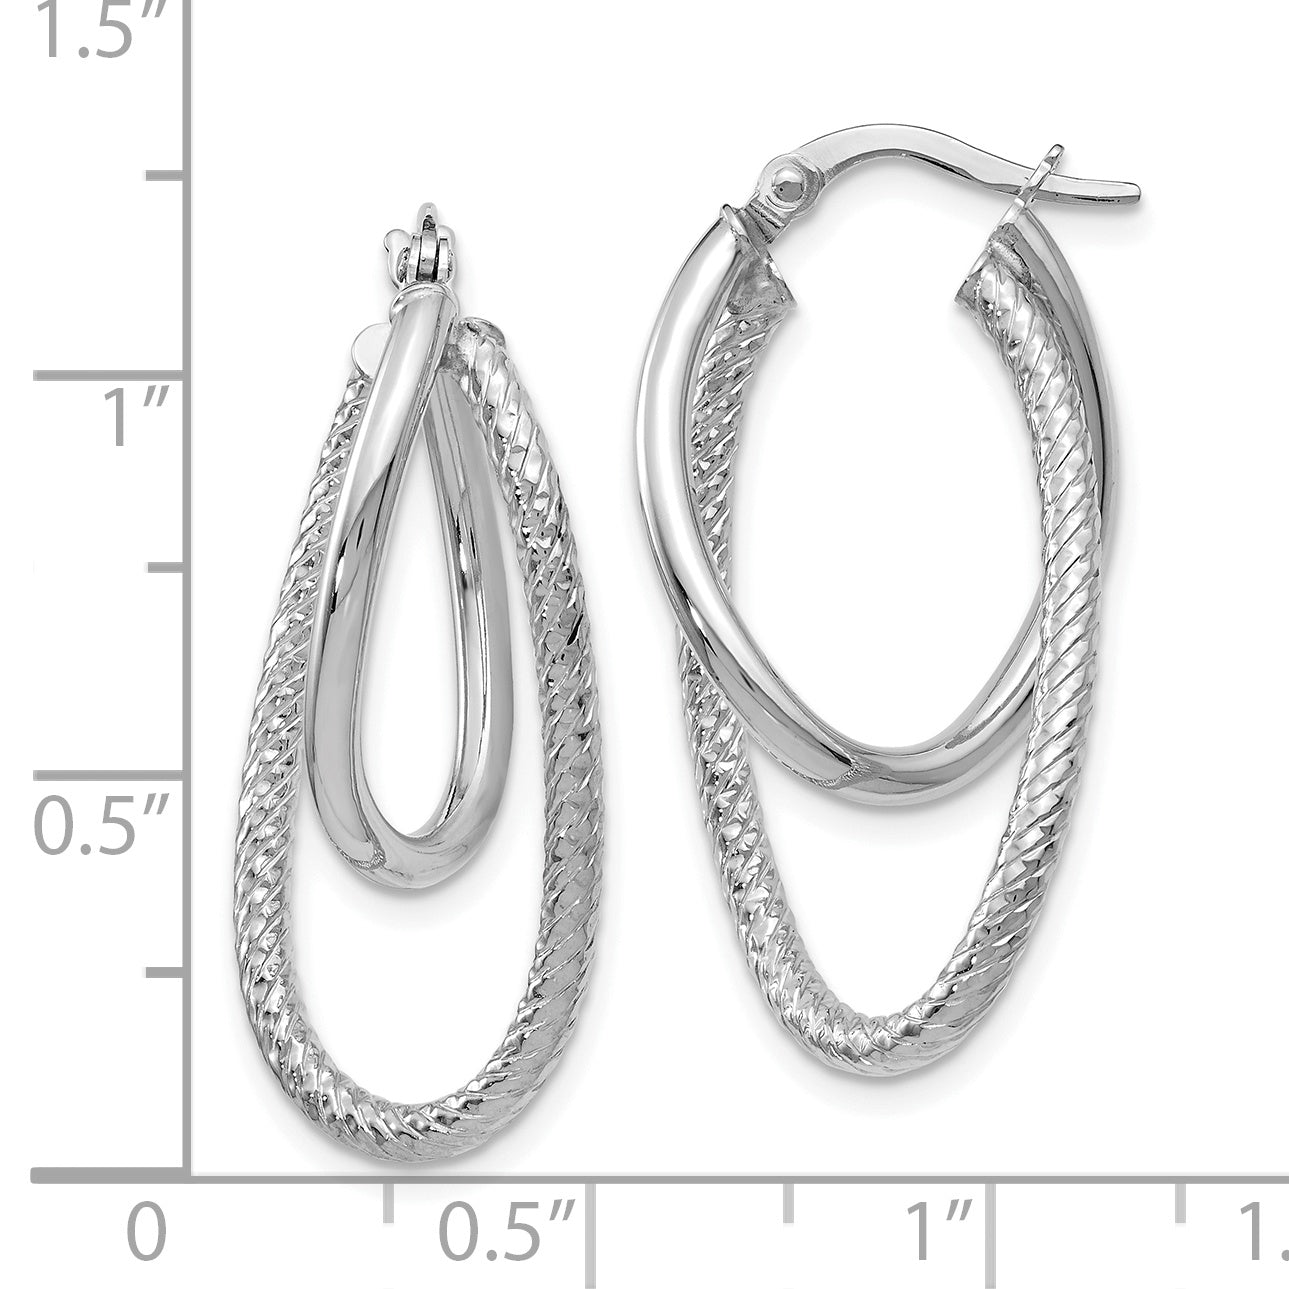 14K White Gold Polished and Textured Hinged Hoop Earrings